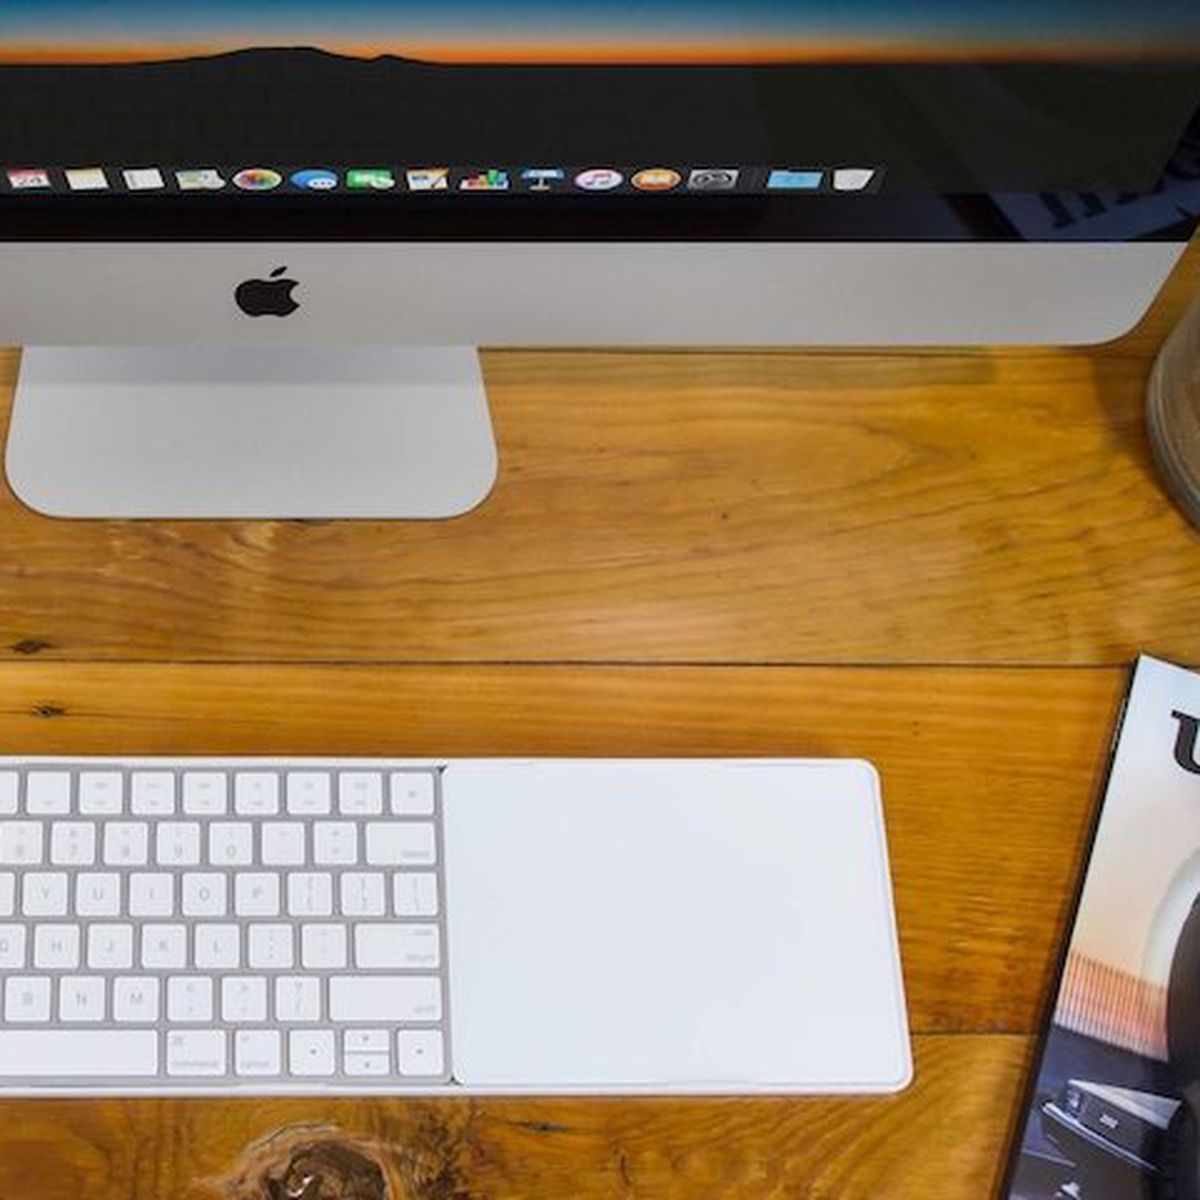 Twelve South MagicBridge | Connects Apple Magic Trackpad 2 to Apple Magic  Keyboard Allowing Them to be one Unit for Desk or Lap use - Trackpad and